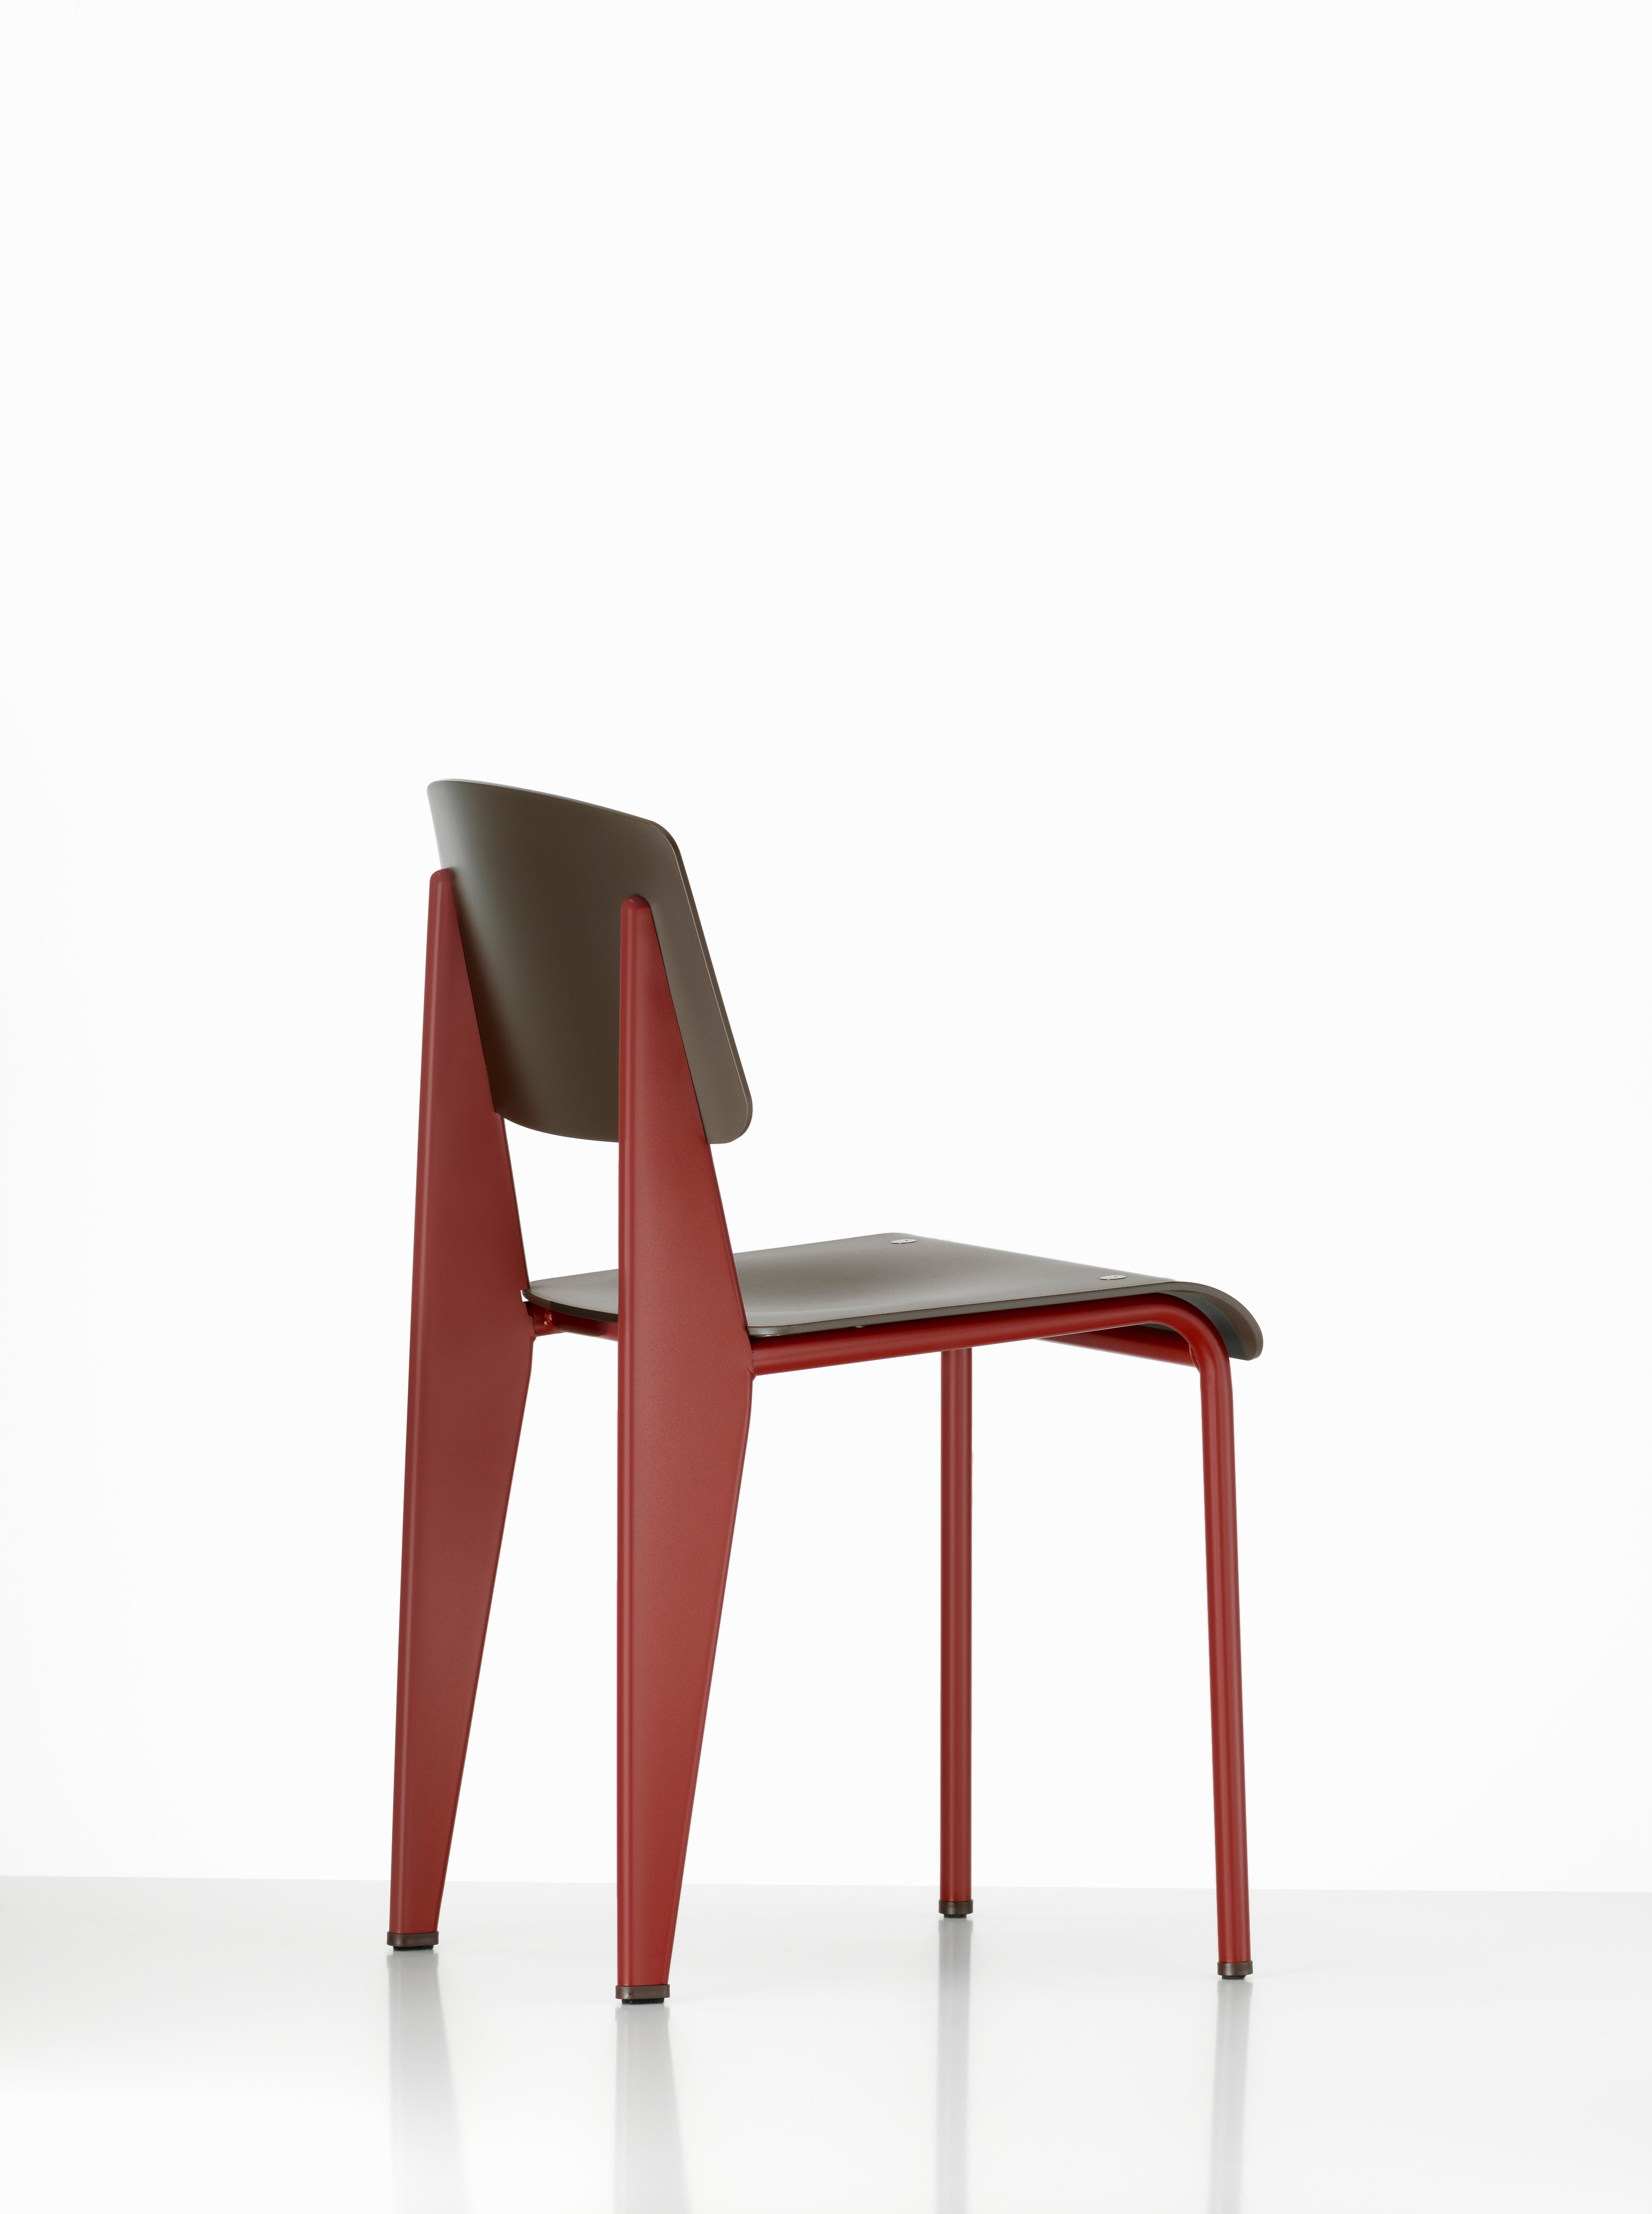 These items are currently only available in the United States.

Made of high quality plastic, the seat shell and backrest of the Standard SP (Siège en Plastique) chair by Jean Prouvé are available in a range of contemporary colors. This gives the